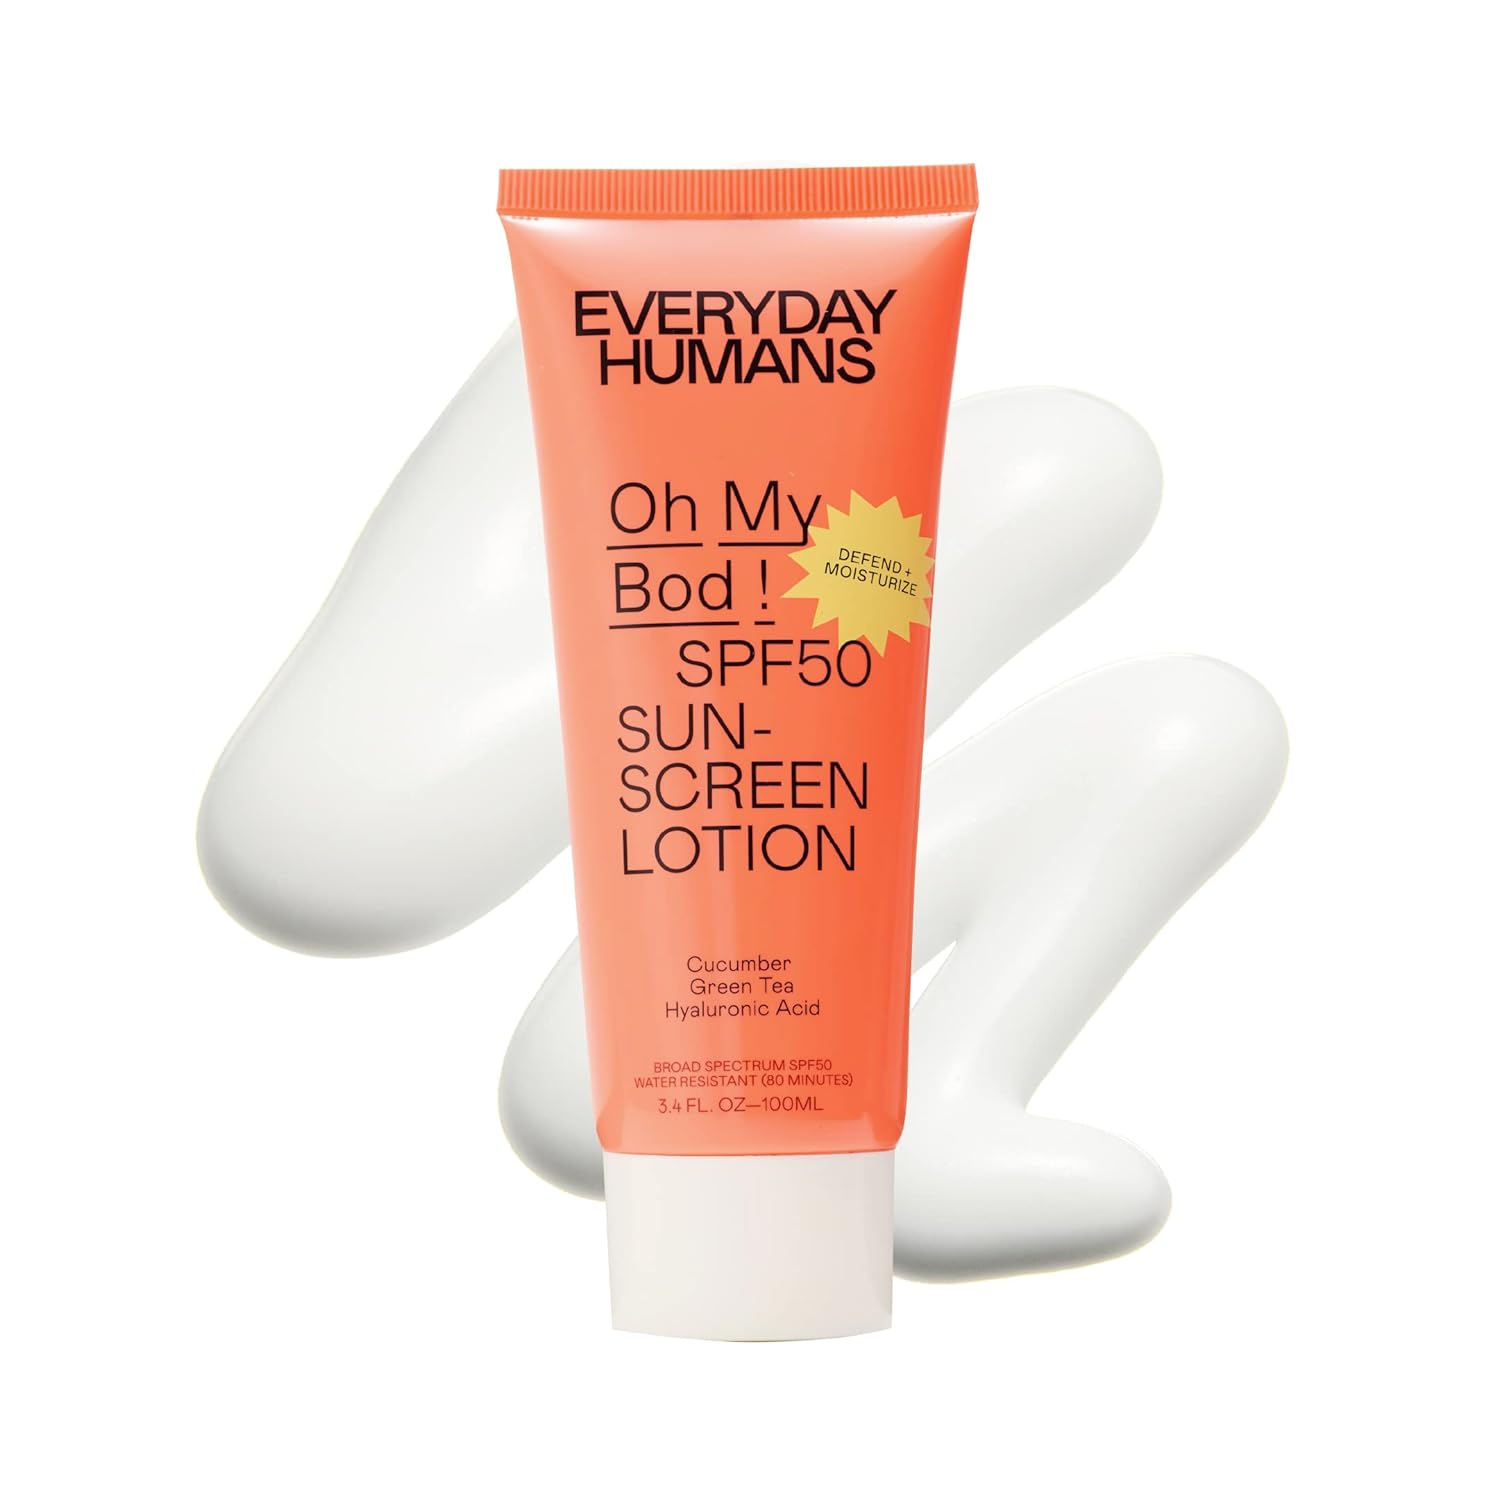 Everyday Humans Oh My Bod SPF50 Sunscreen Body Lotion 3.4 oz | Travel Ultra Light & Invisible SPF | Sweat & Water Resistant | Doesn't Sting Eyes | UVA/UVB Broad Spectrum Protection | Oxybenzone Free